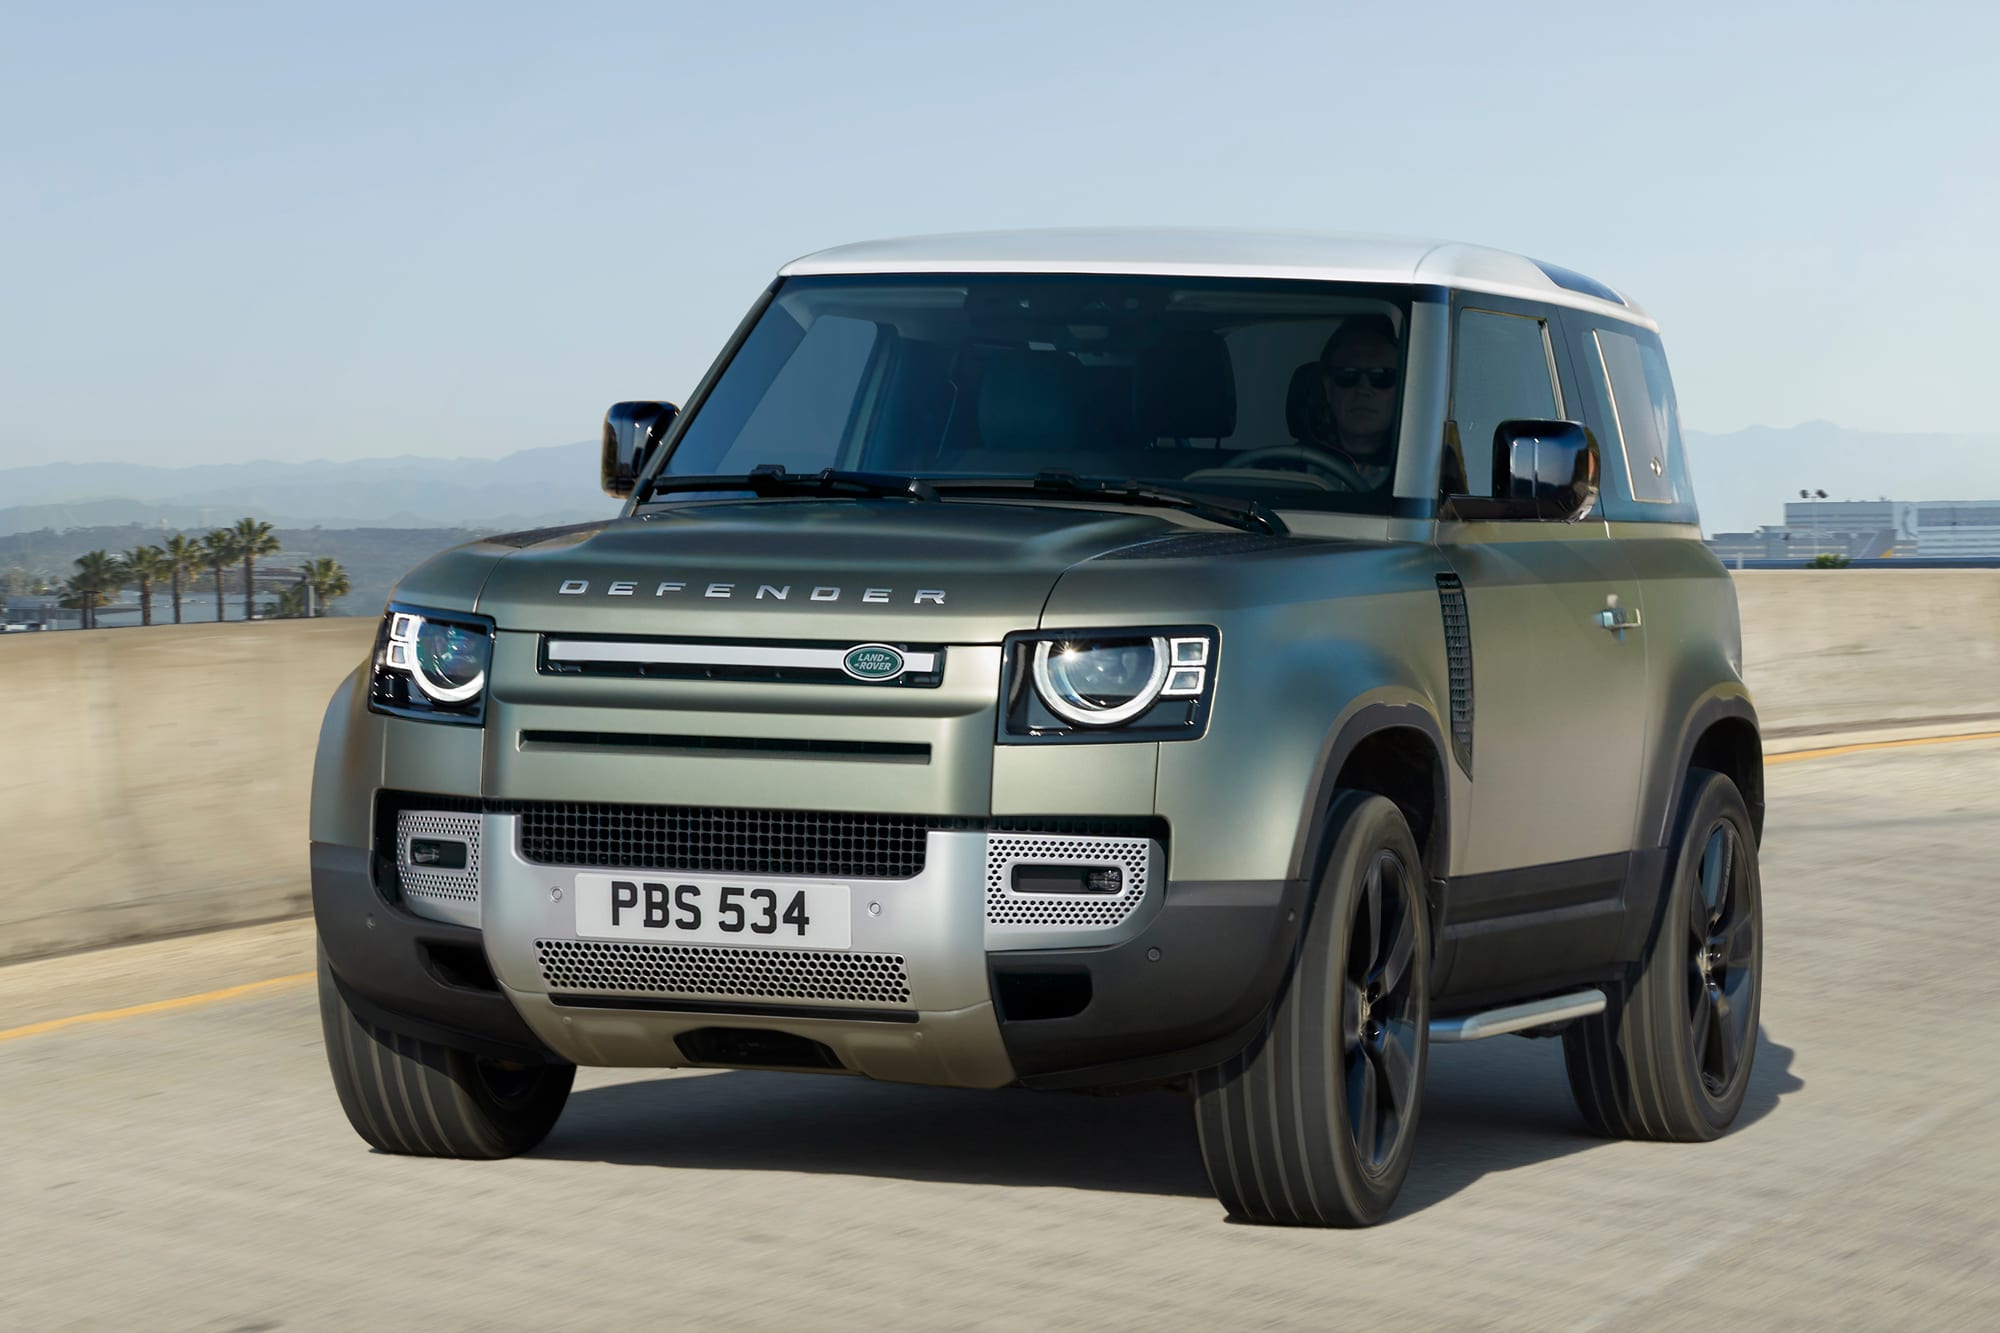 Land Rover unveils the all new Defender at Frankfurt Motor Show after 22-year hiatus in US